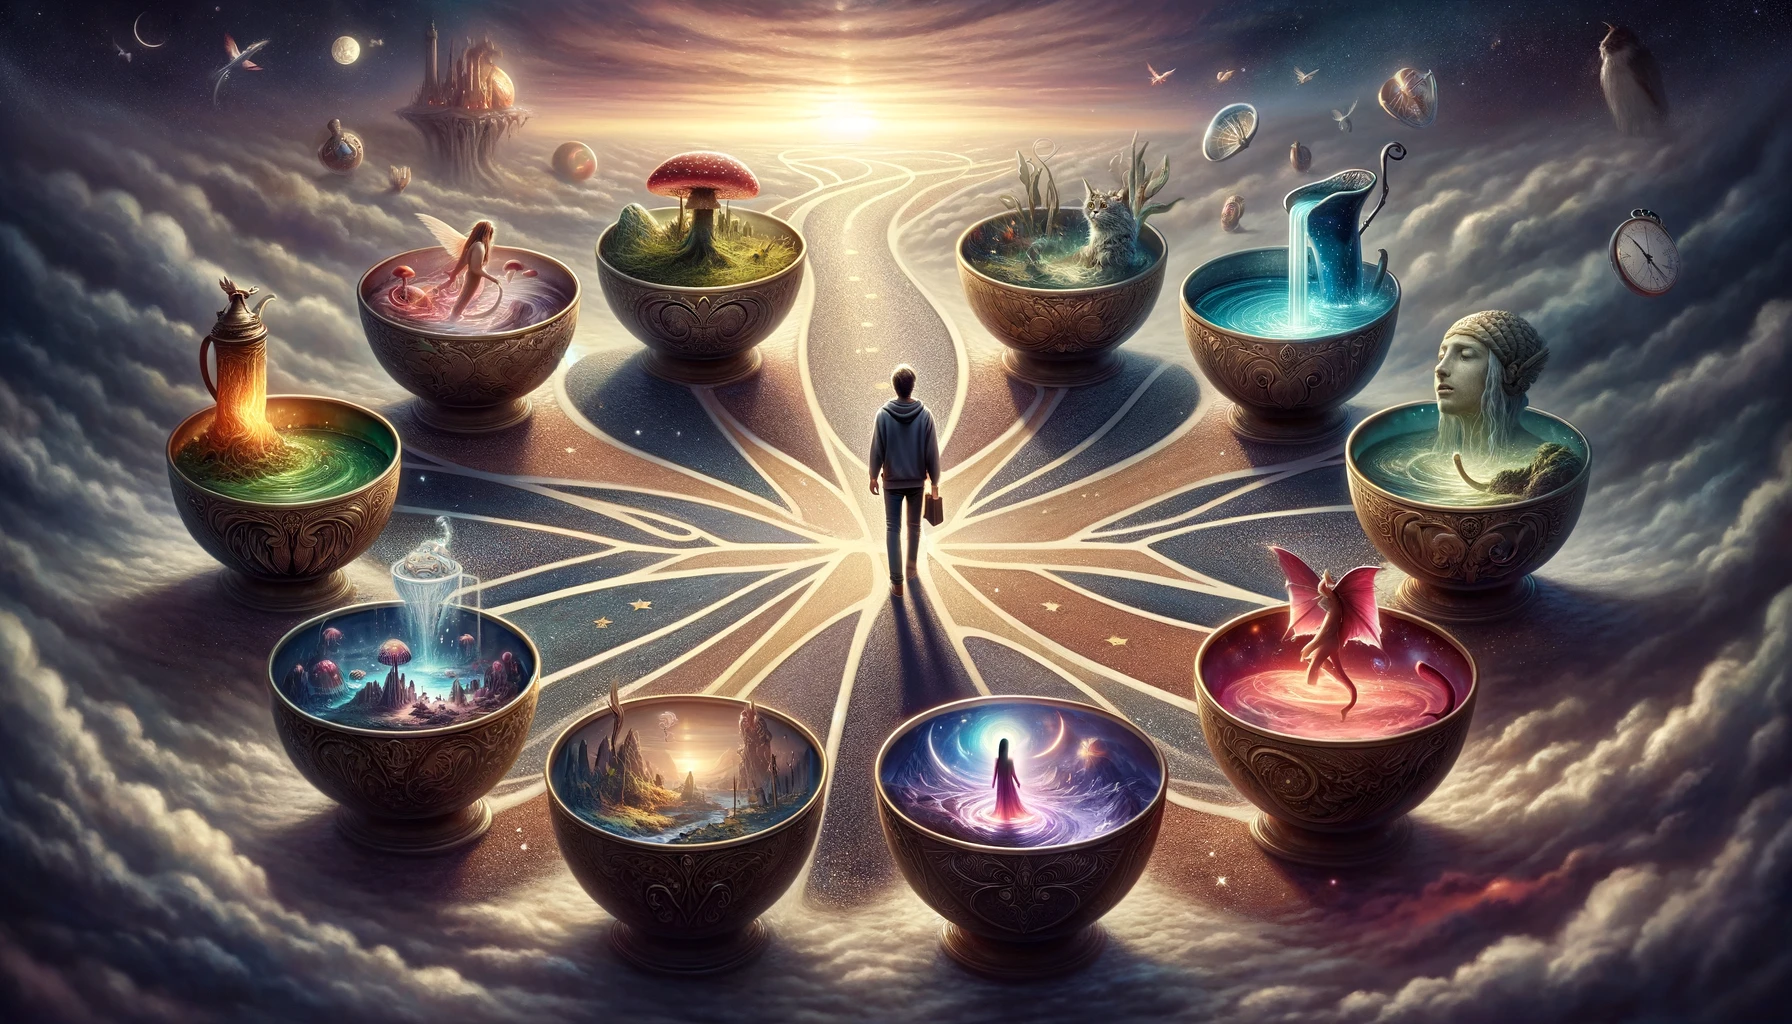 An image that portrays a person standing at a crossroad surrounded by seven enchanting cups each containing a different fantasy world or desire. The